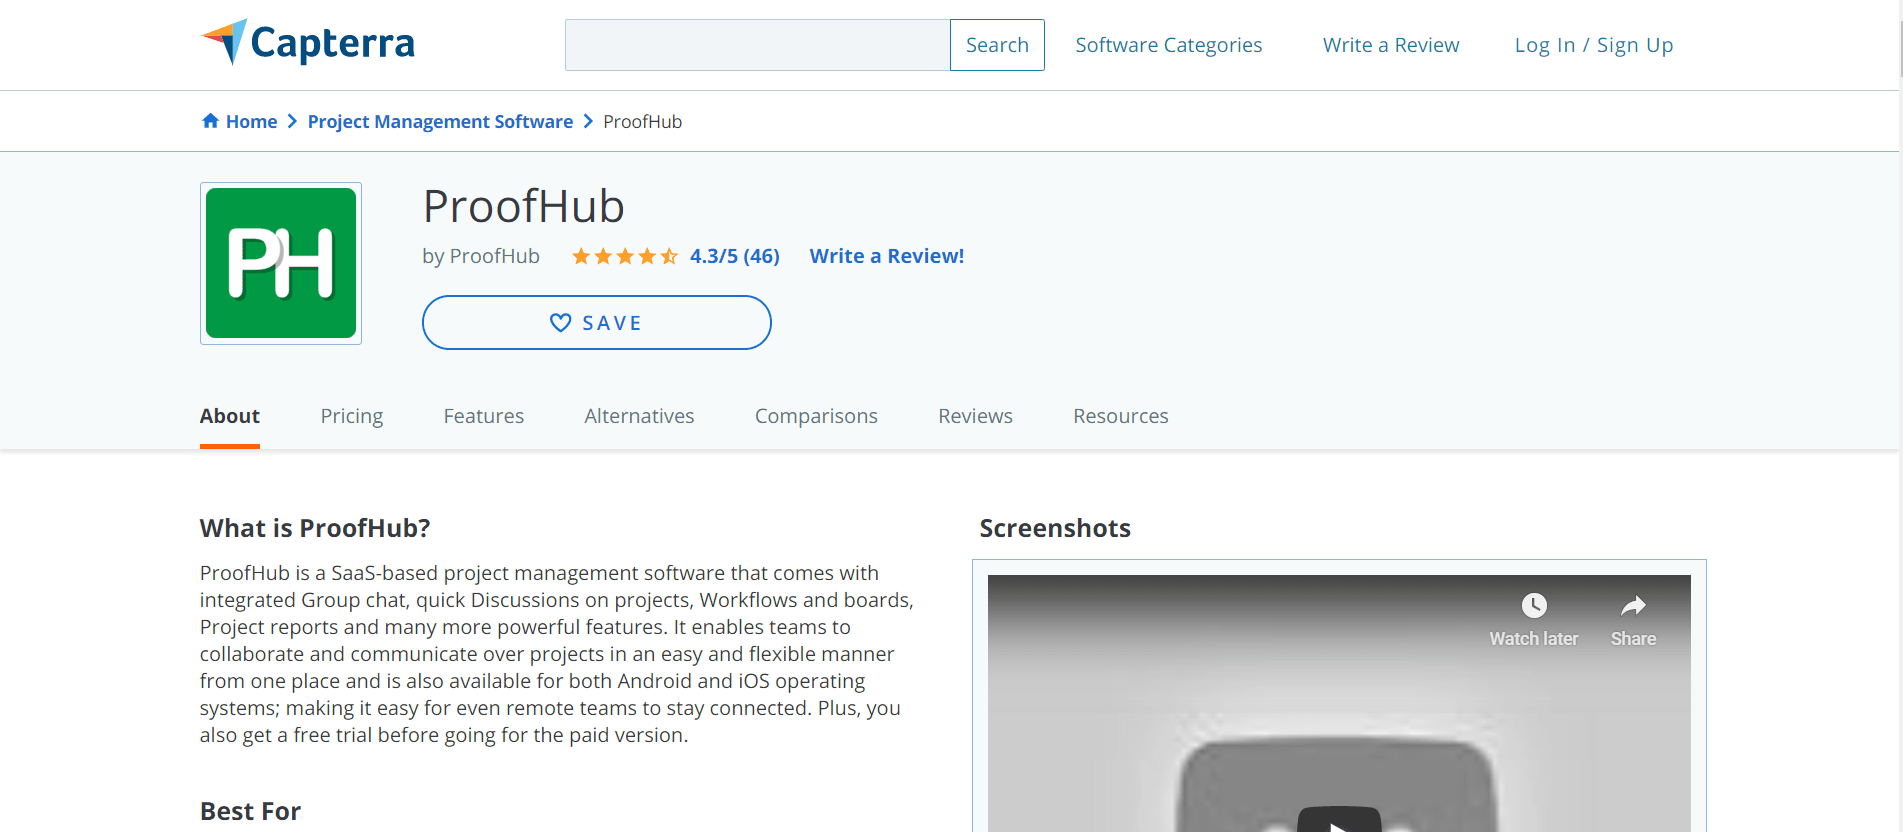 ProofHub review on Capterra